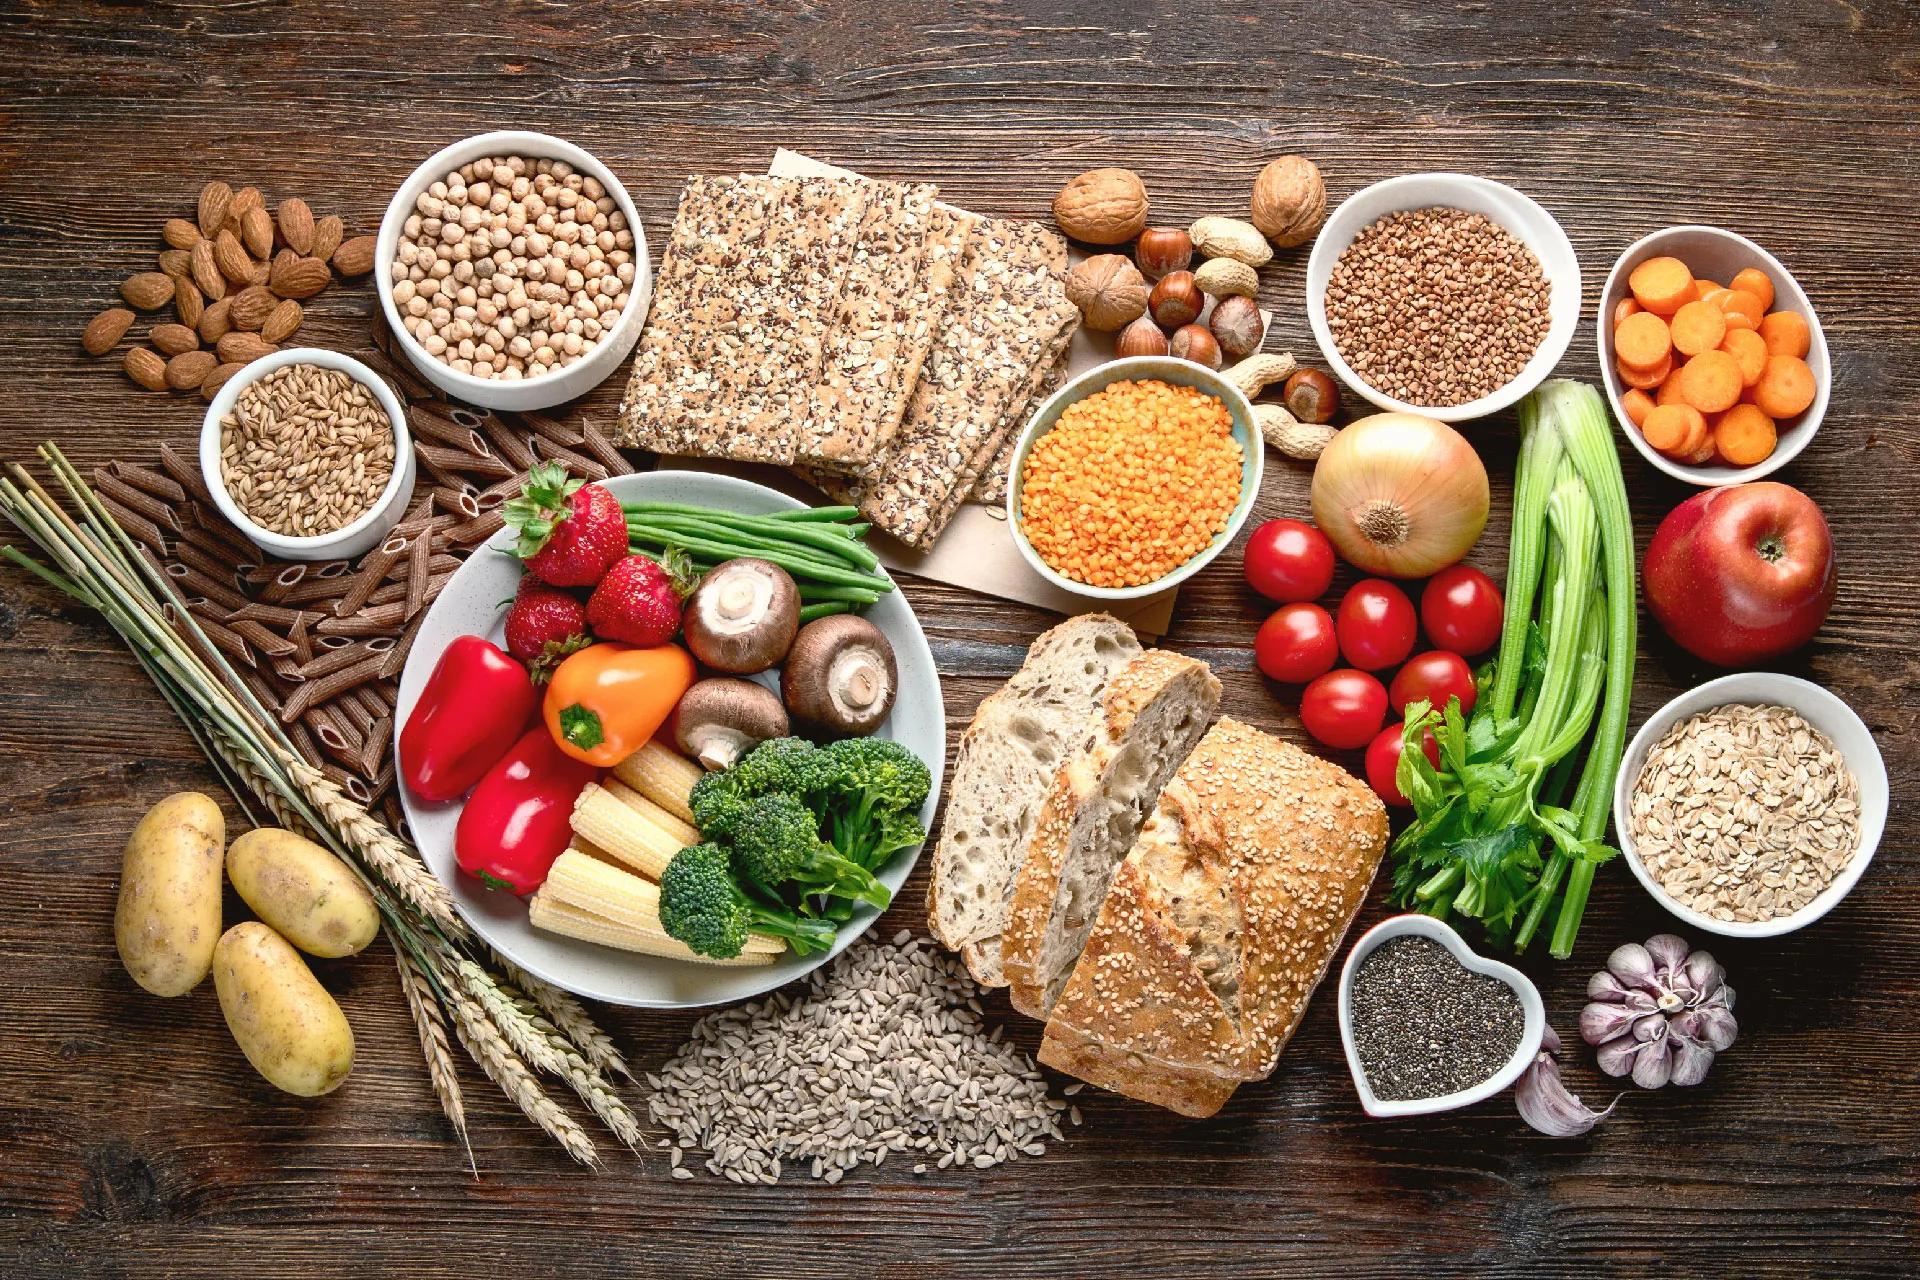 High Fiber Foods for Diabetics to Keep Blood Sugar Levels in Control